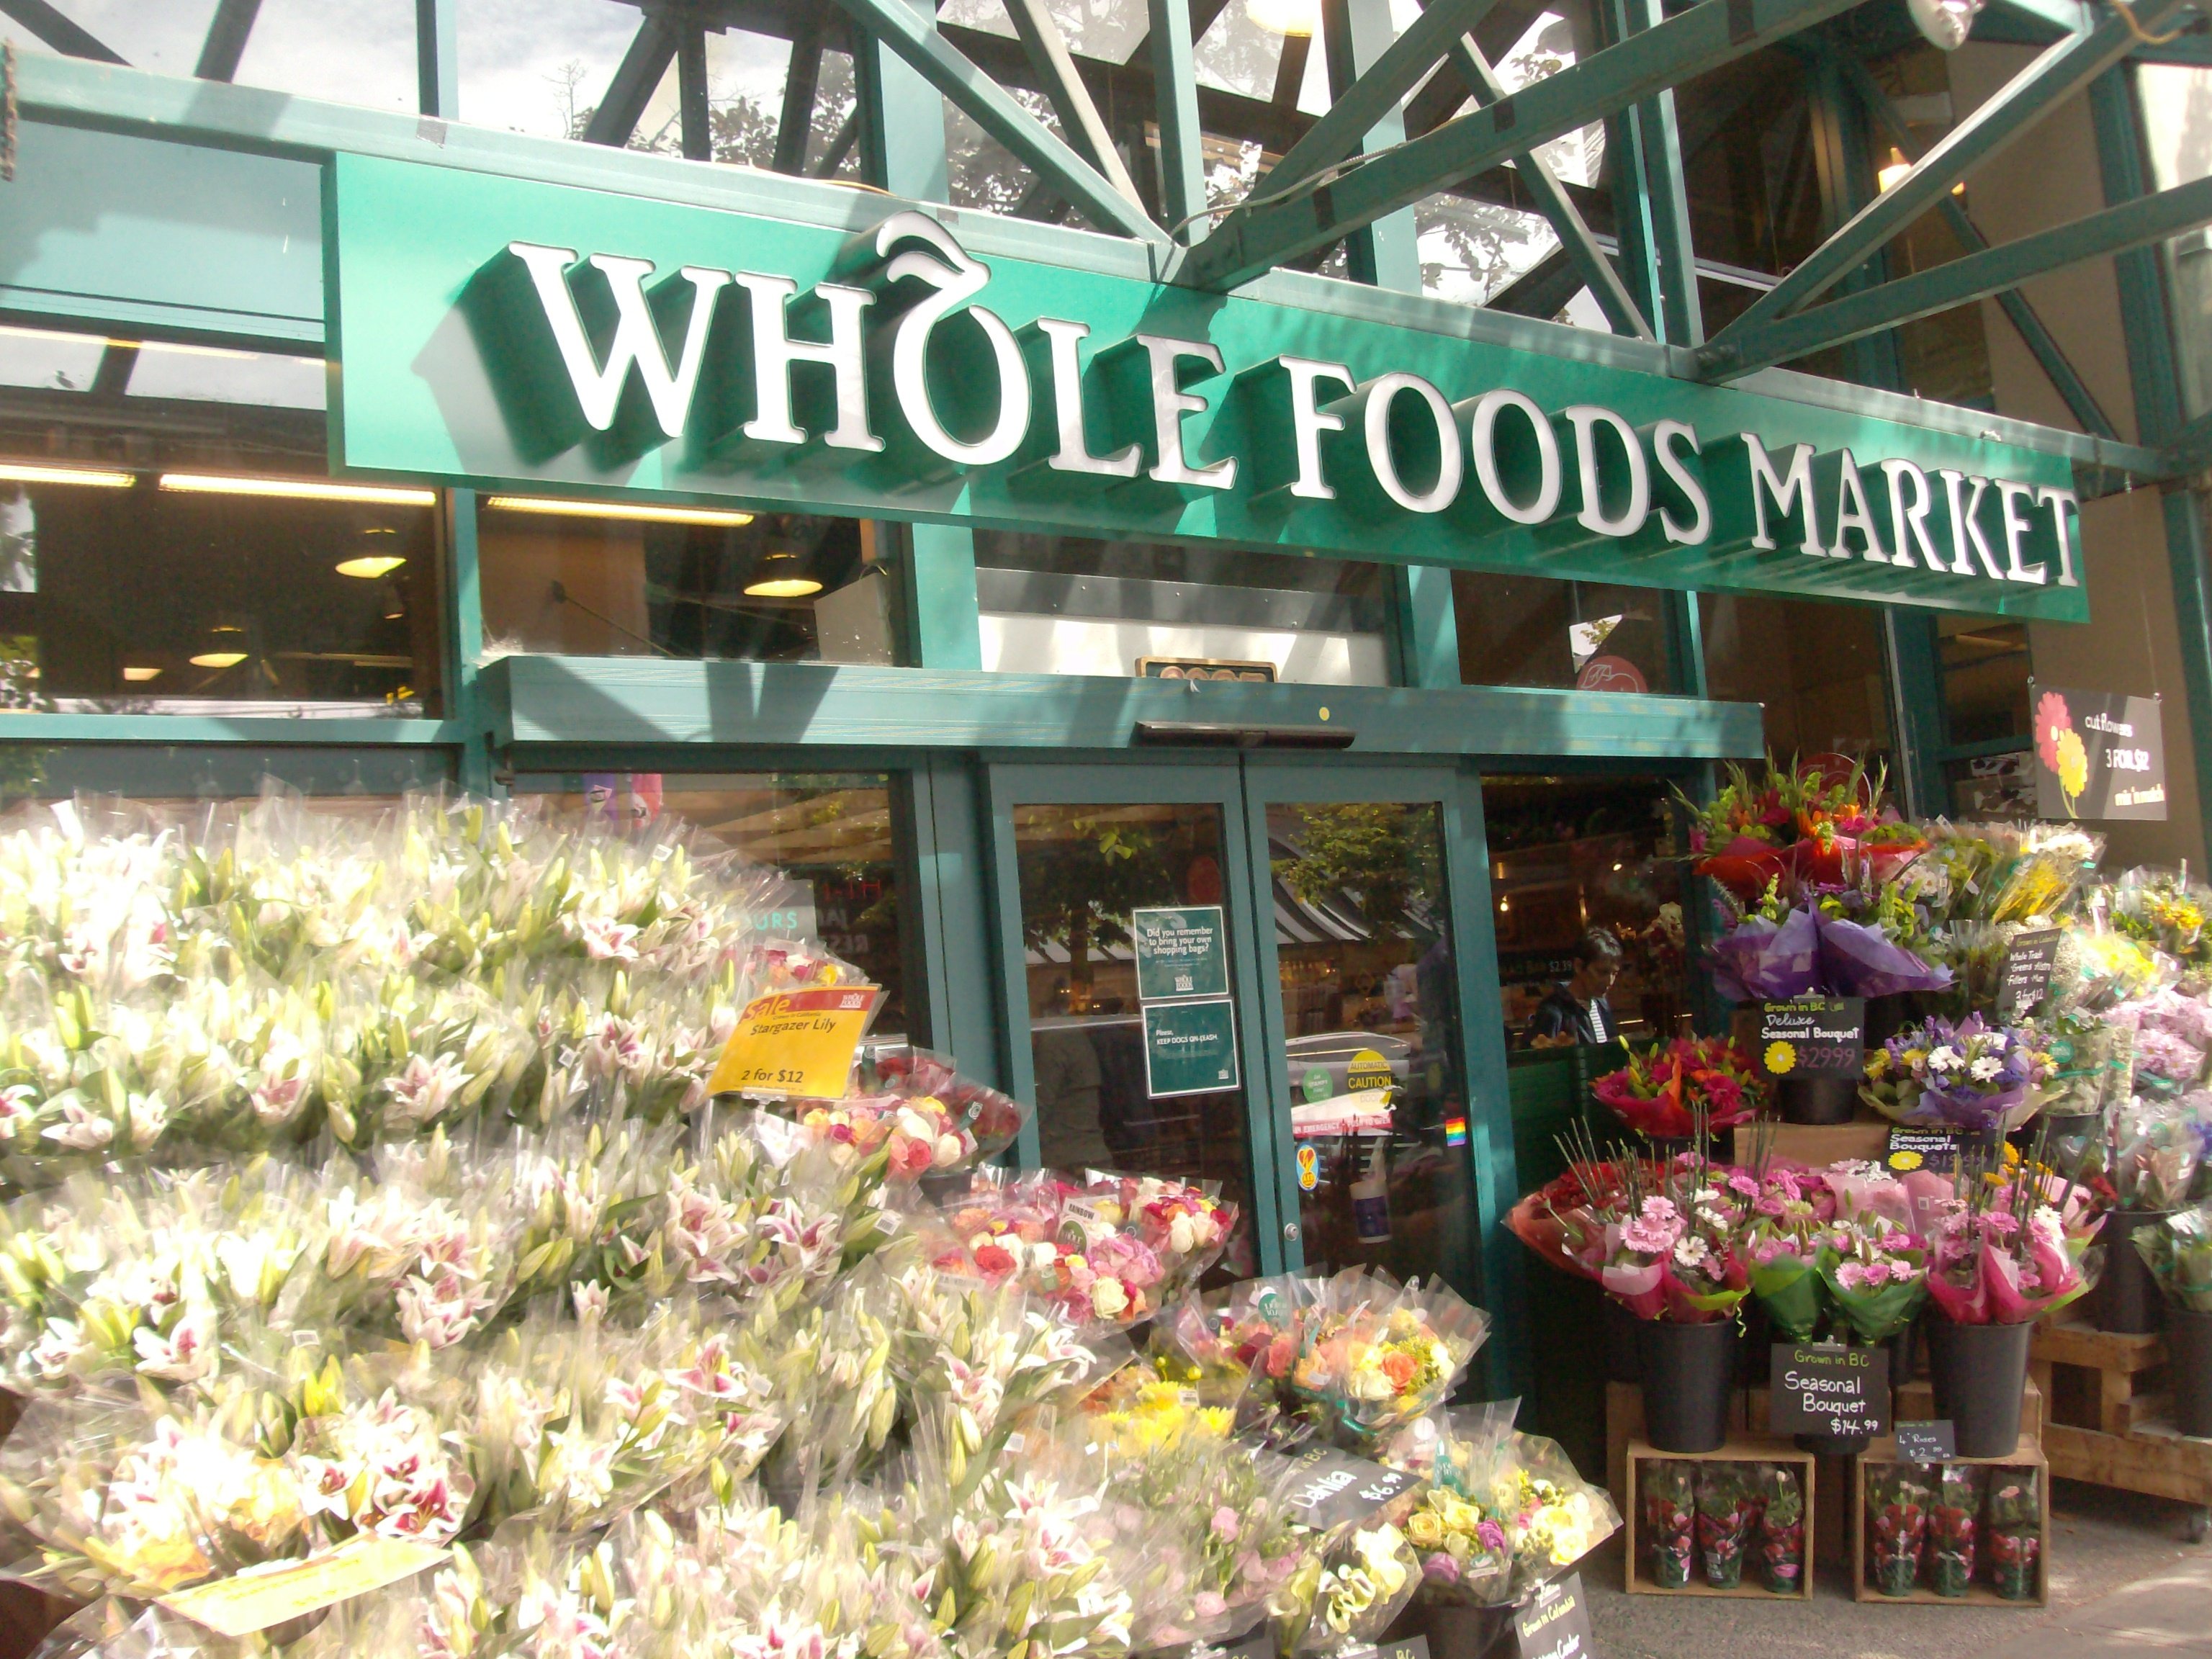 Whole Foods storefront